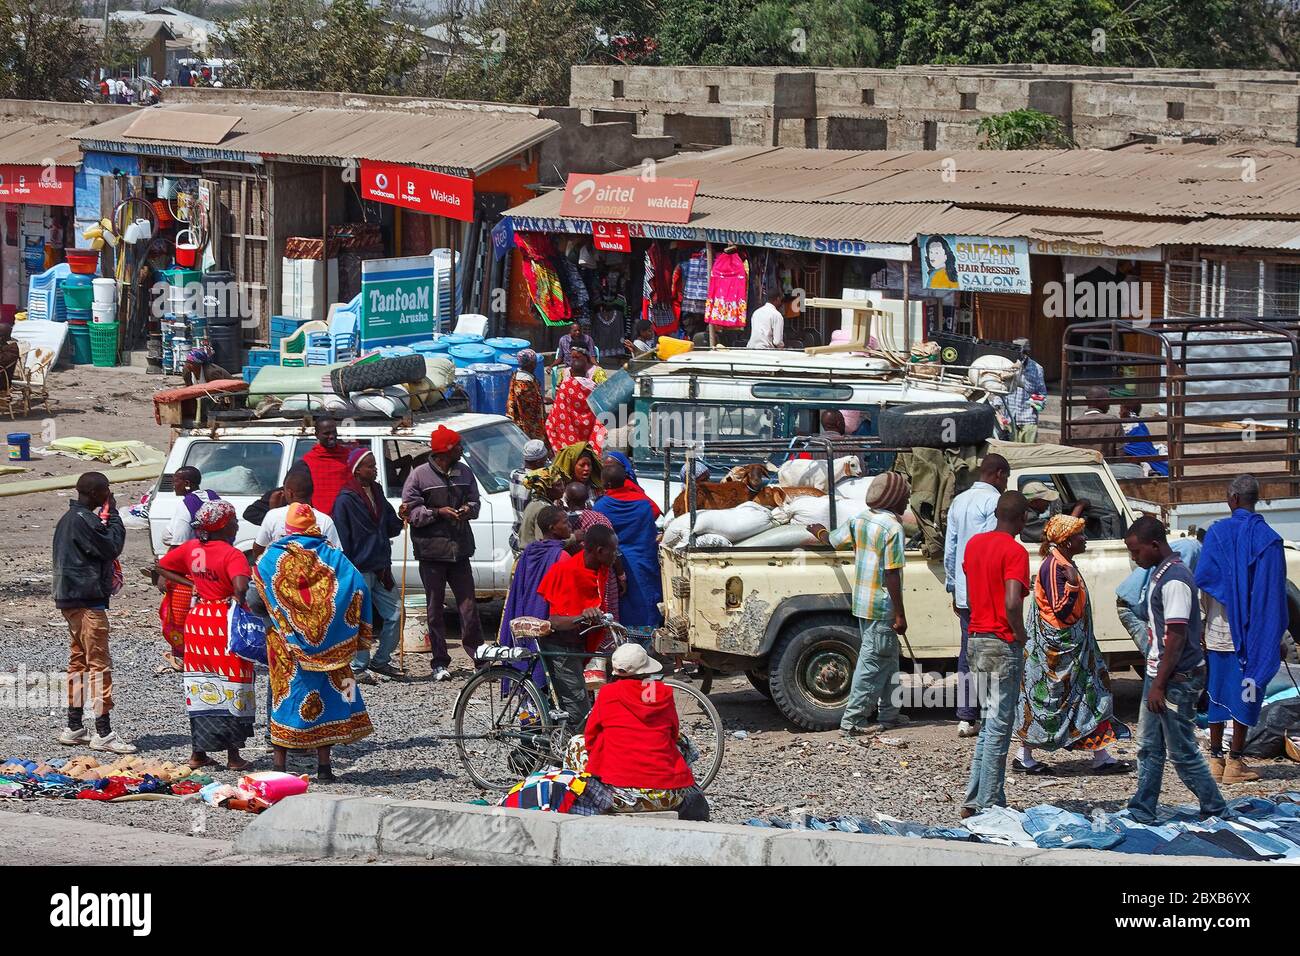 small shops, people, vehicles, clothing, household items, corrugated metal roofs, business, selling, Africa, Arusha; Tanzania Stock Photo